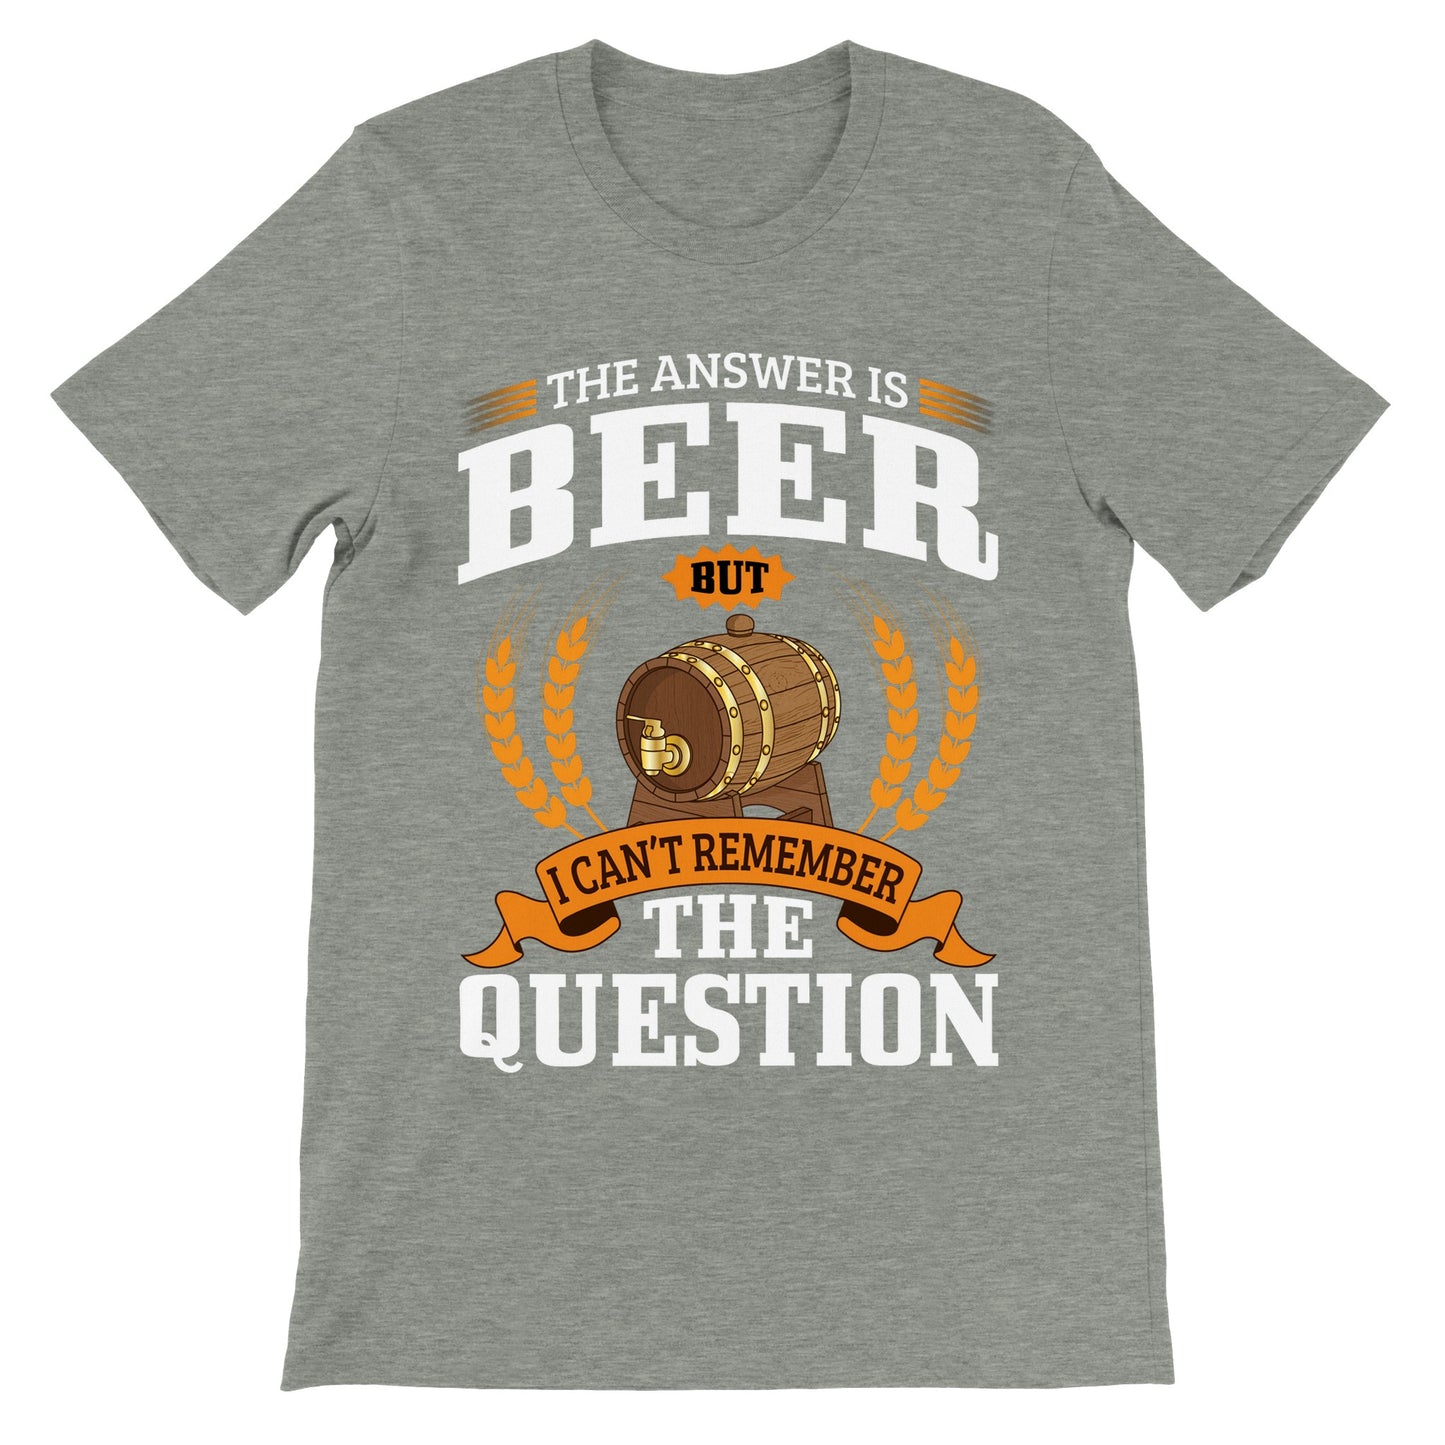 Lustige T-Shirts – The Answer is Beer But – Premium Unisex T-Shirt 